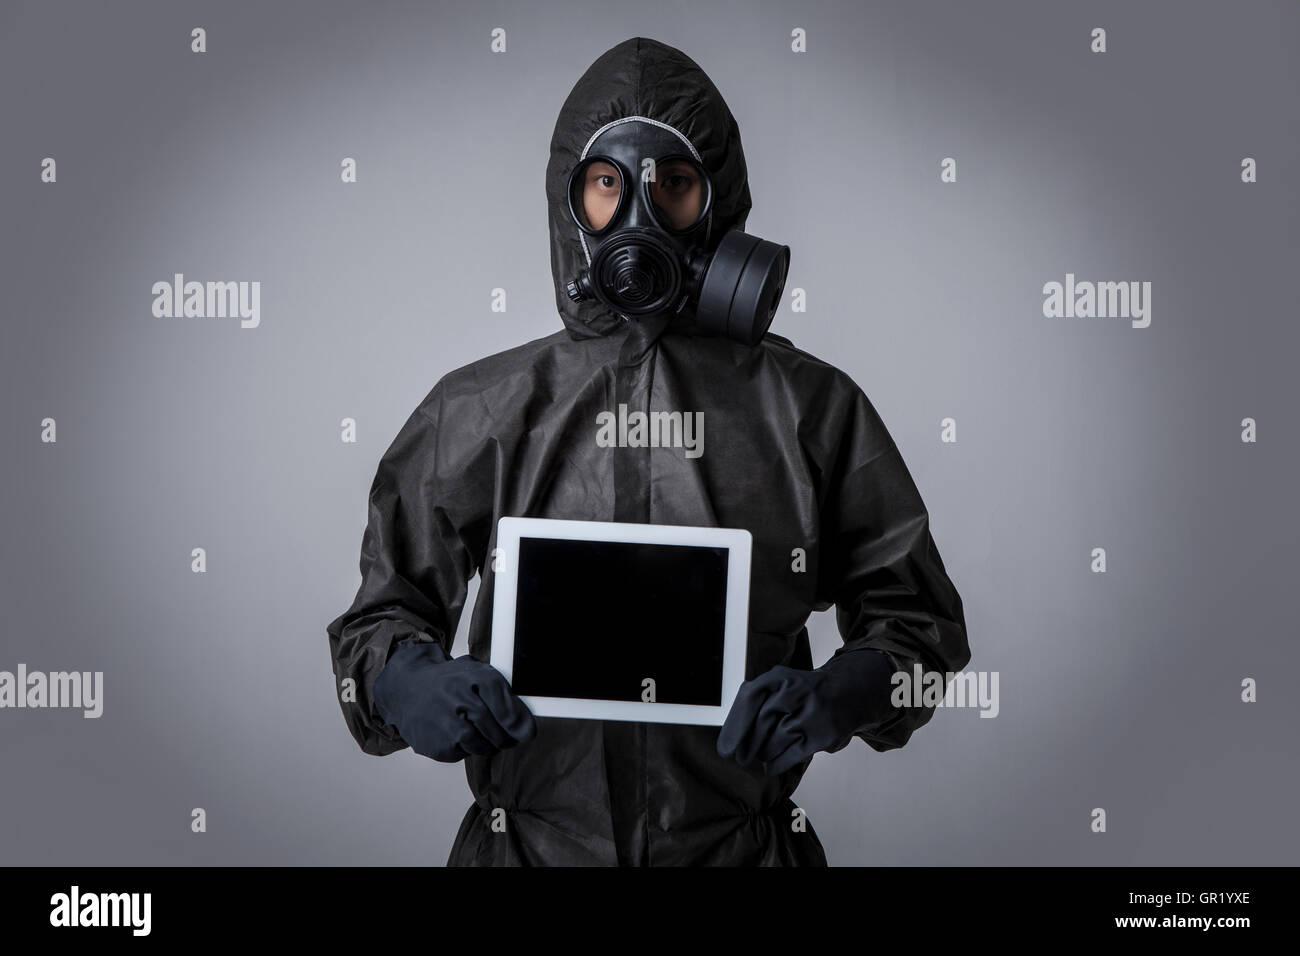 Young man wearing gas mask and black clothes holding a tablet Stock Photo